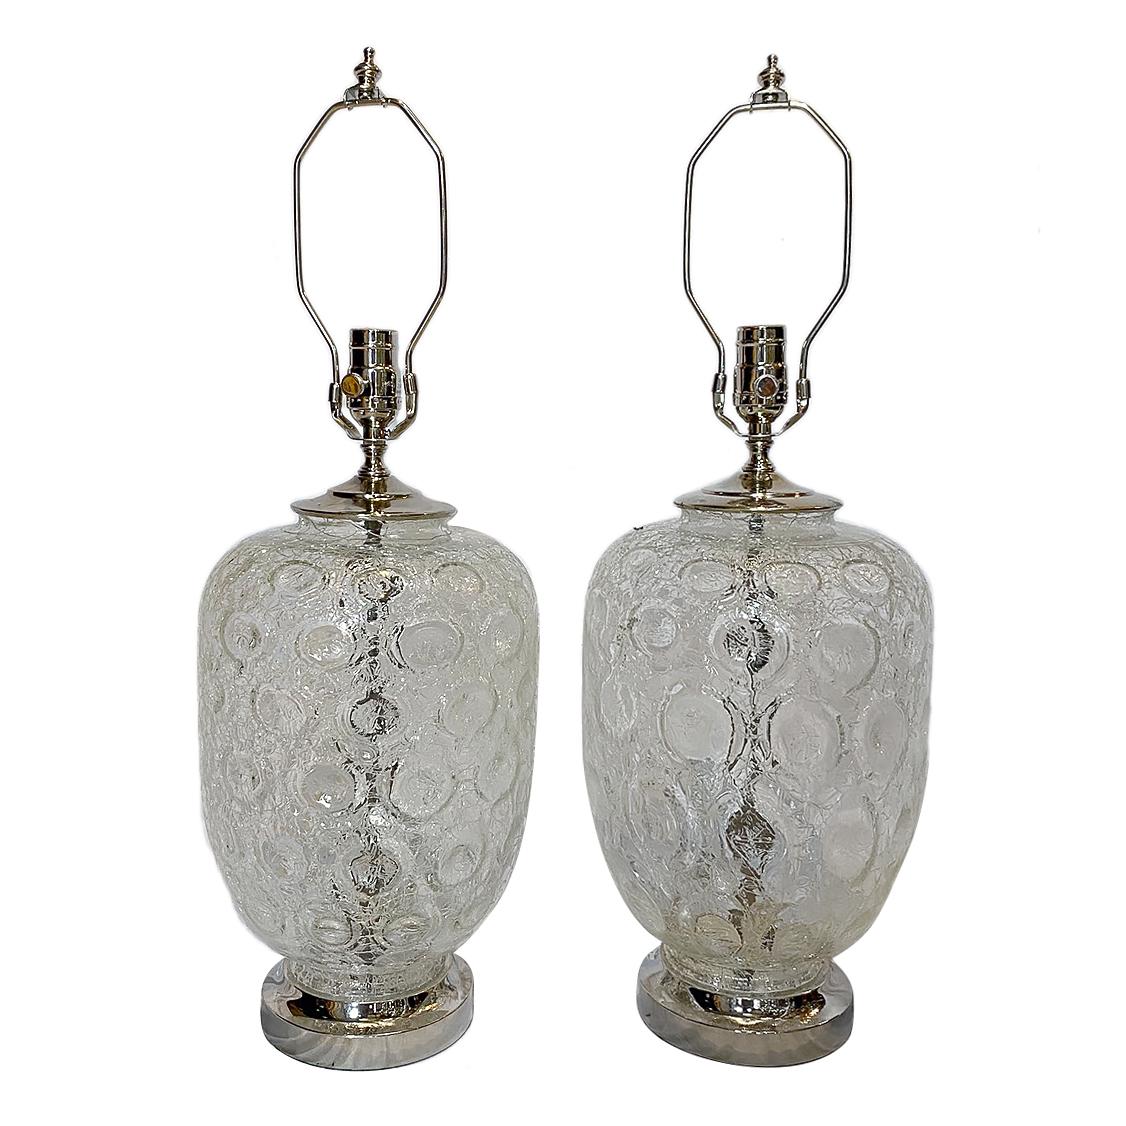 A pair of circa 1960s Danish molded glass table lamps with bubble pattern and silver plated bases.

Measurements:
Height of body 15